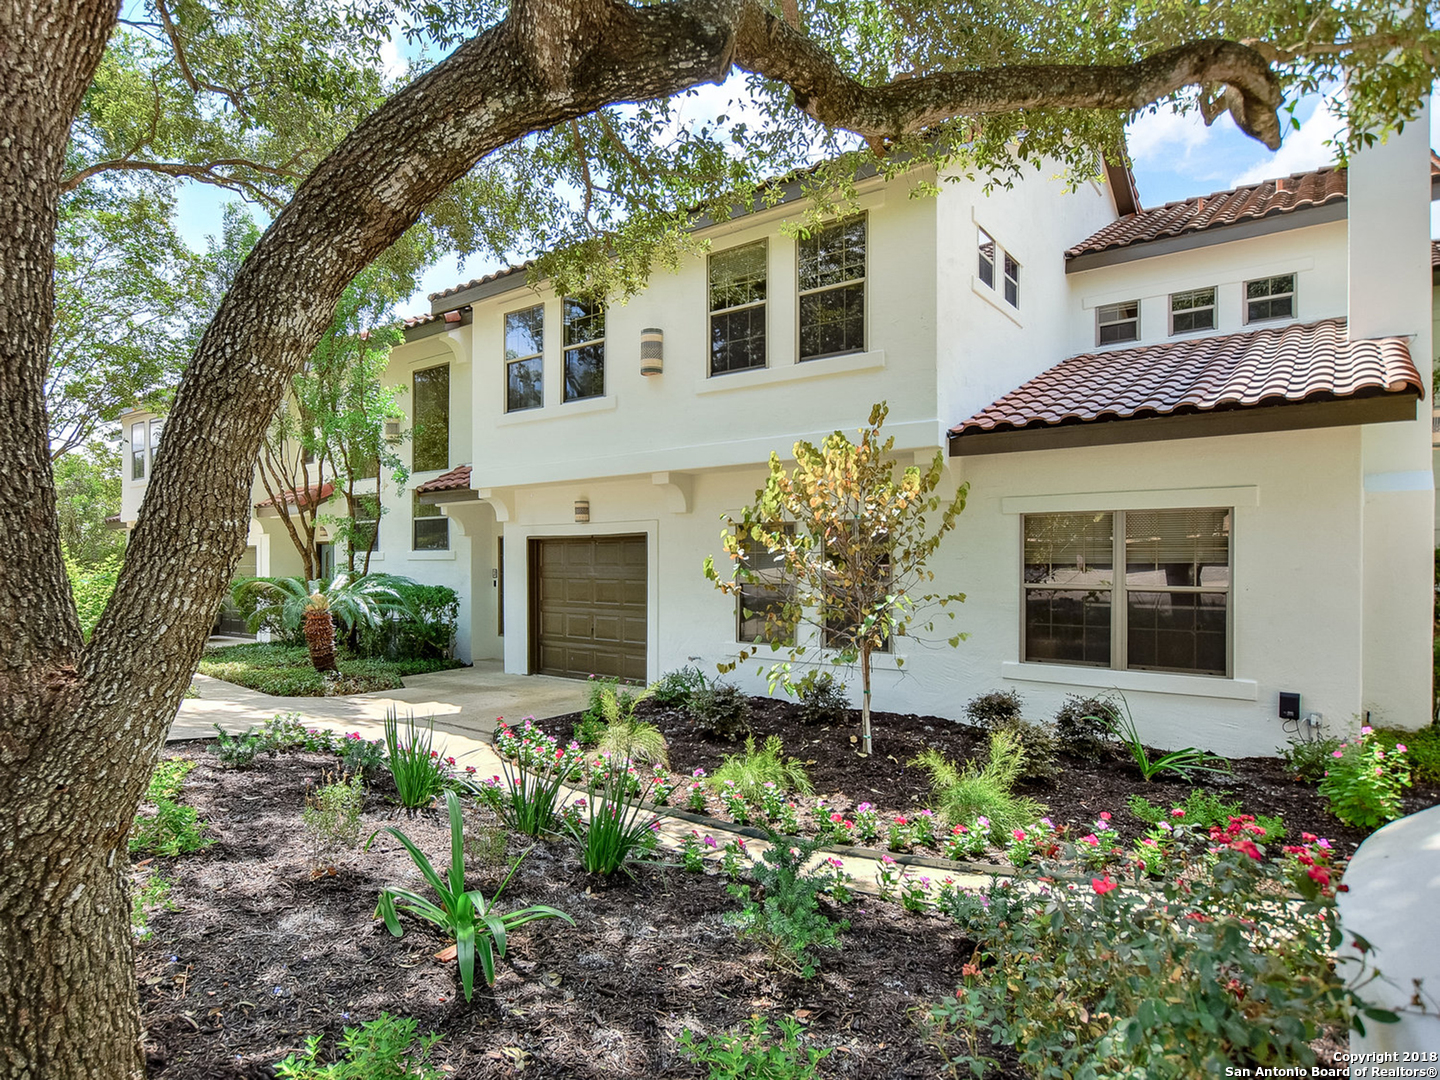 Luxurious townhome-style living in the heart of Alamo Heights! Classic architecture in  quiet, shady surroundings remodeled w/the finest of finishes so convenient to shopping, arts & dining! Enjoy nature in the largest private patio area of all units. Fine finishes to include wood & marble flooring; chef's kitchen with miles of quartzite counters & ample cabinets. The floorplan is open to windowed, airy living spaces.  New plantation shutters.   Elegant bedroom suites provide roomy closets & stunning en suite luxury baths. Two car rear-entry garage newly tiled and outfitted with a Tesla electric car charger. NEST thermostats, CAT 5, fiber. AHISD.